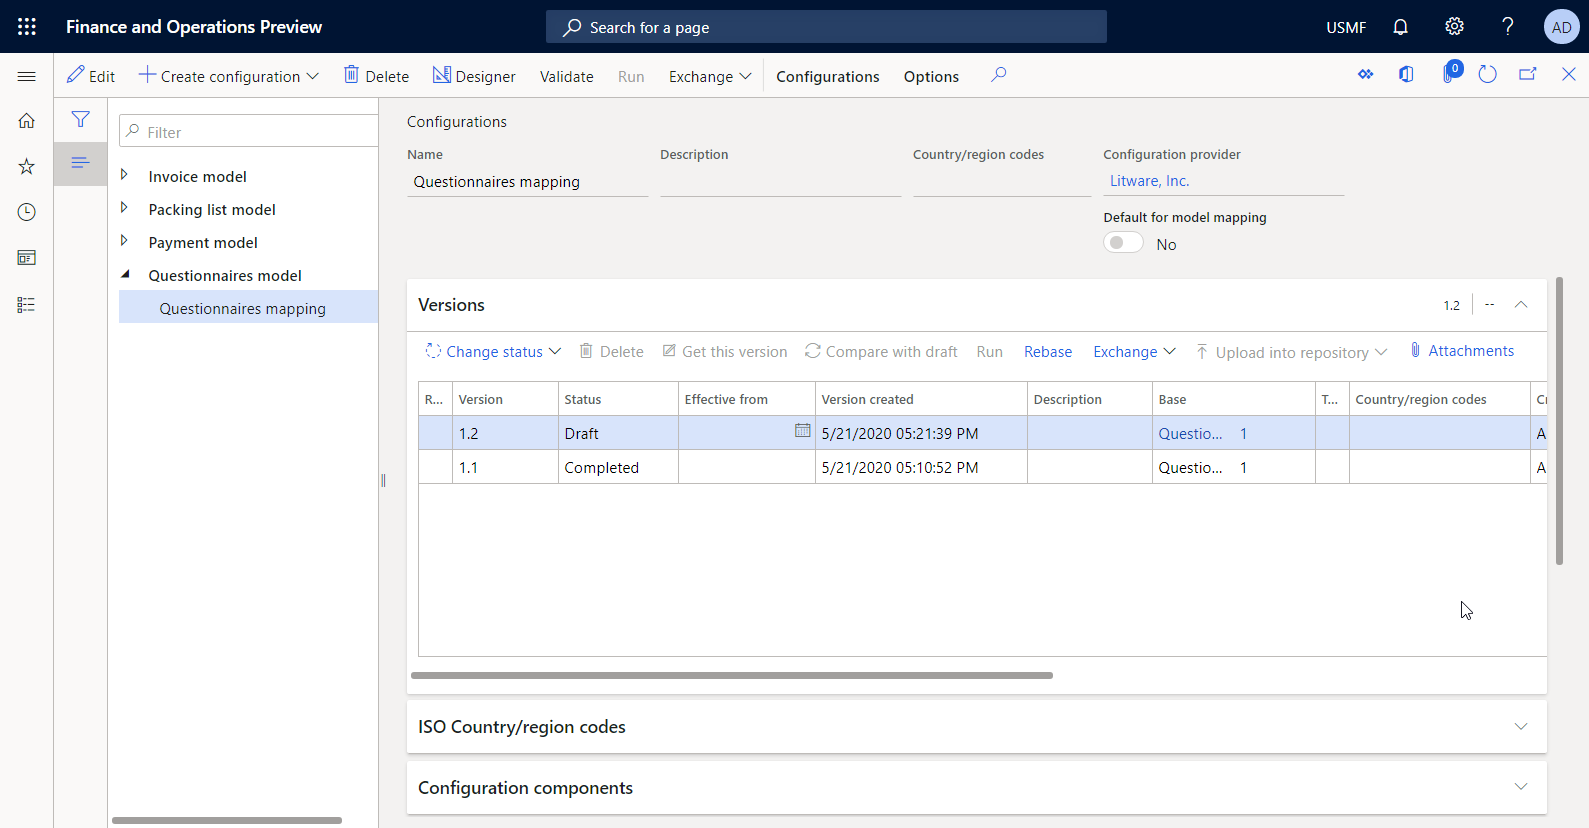 Versions of the editable ER configuration on the Configurations page.